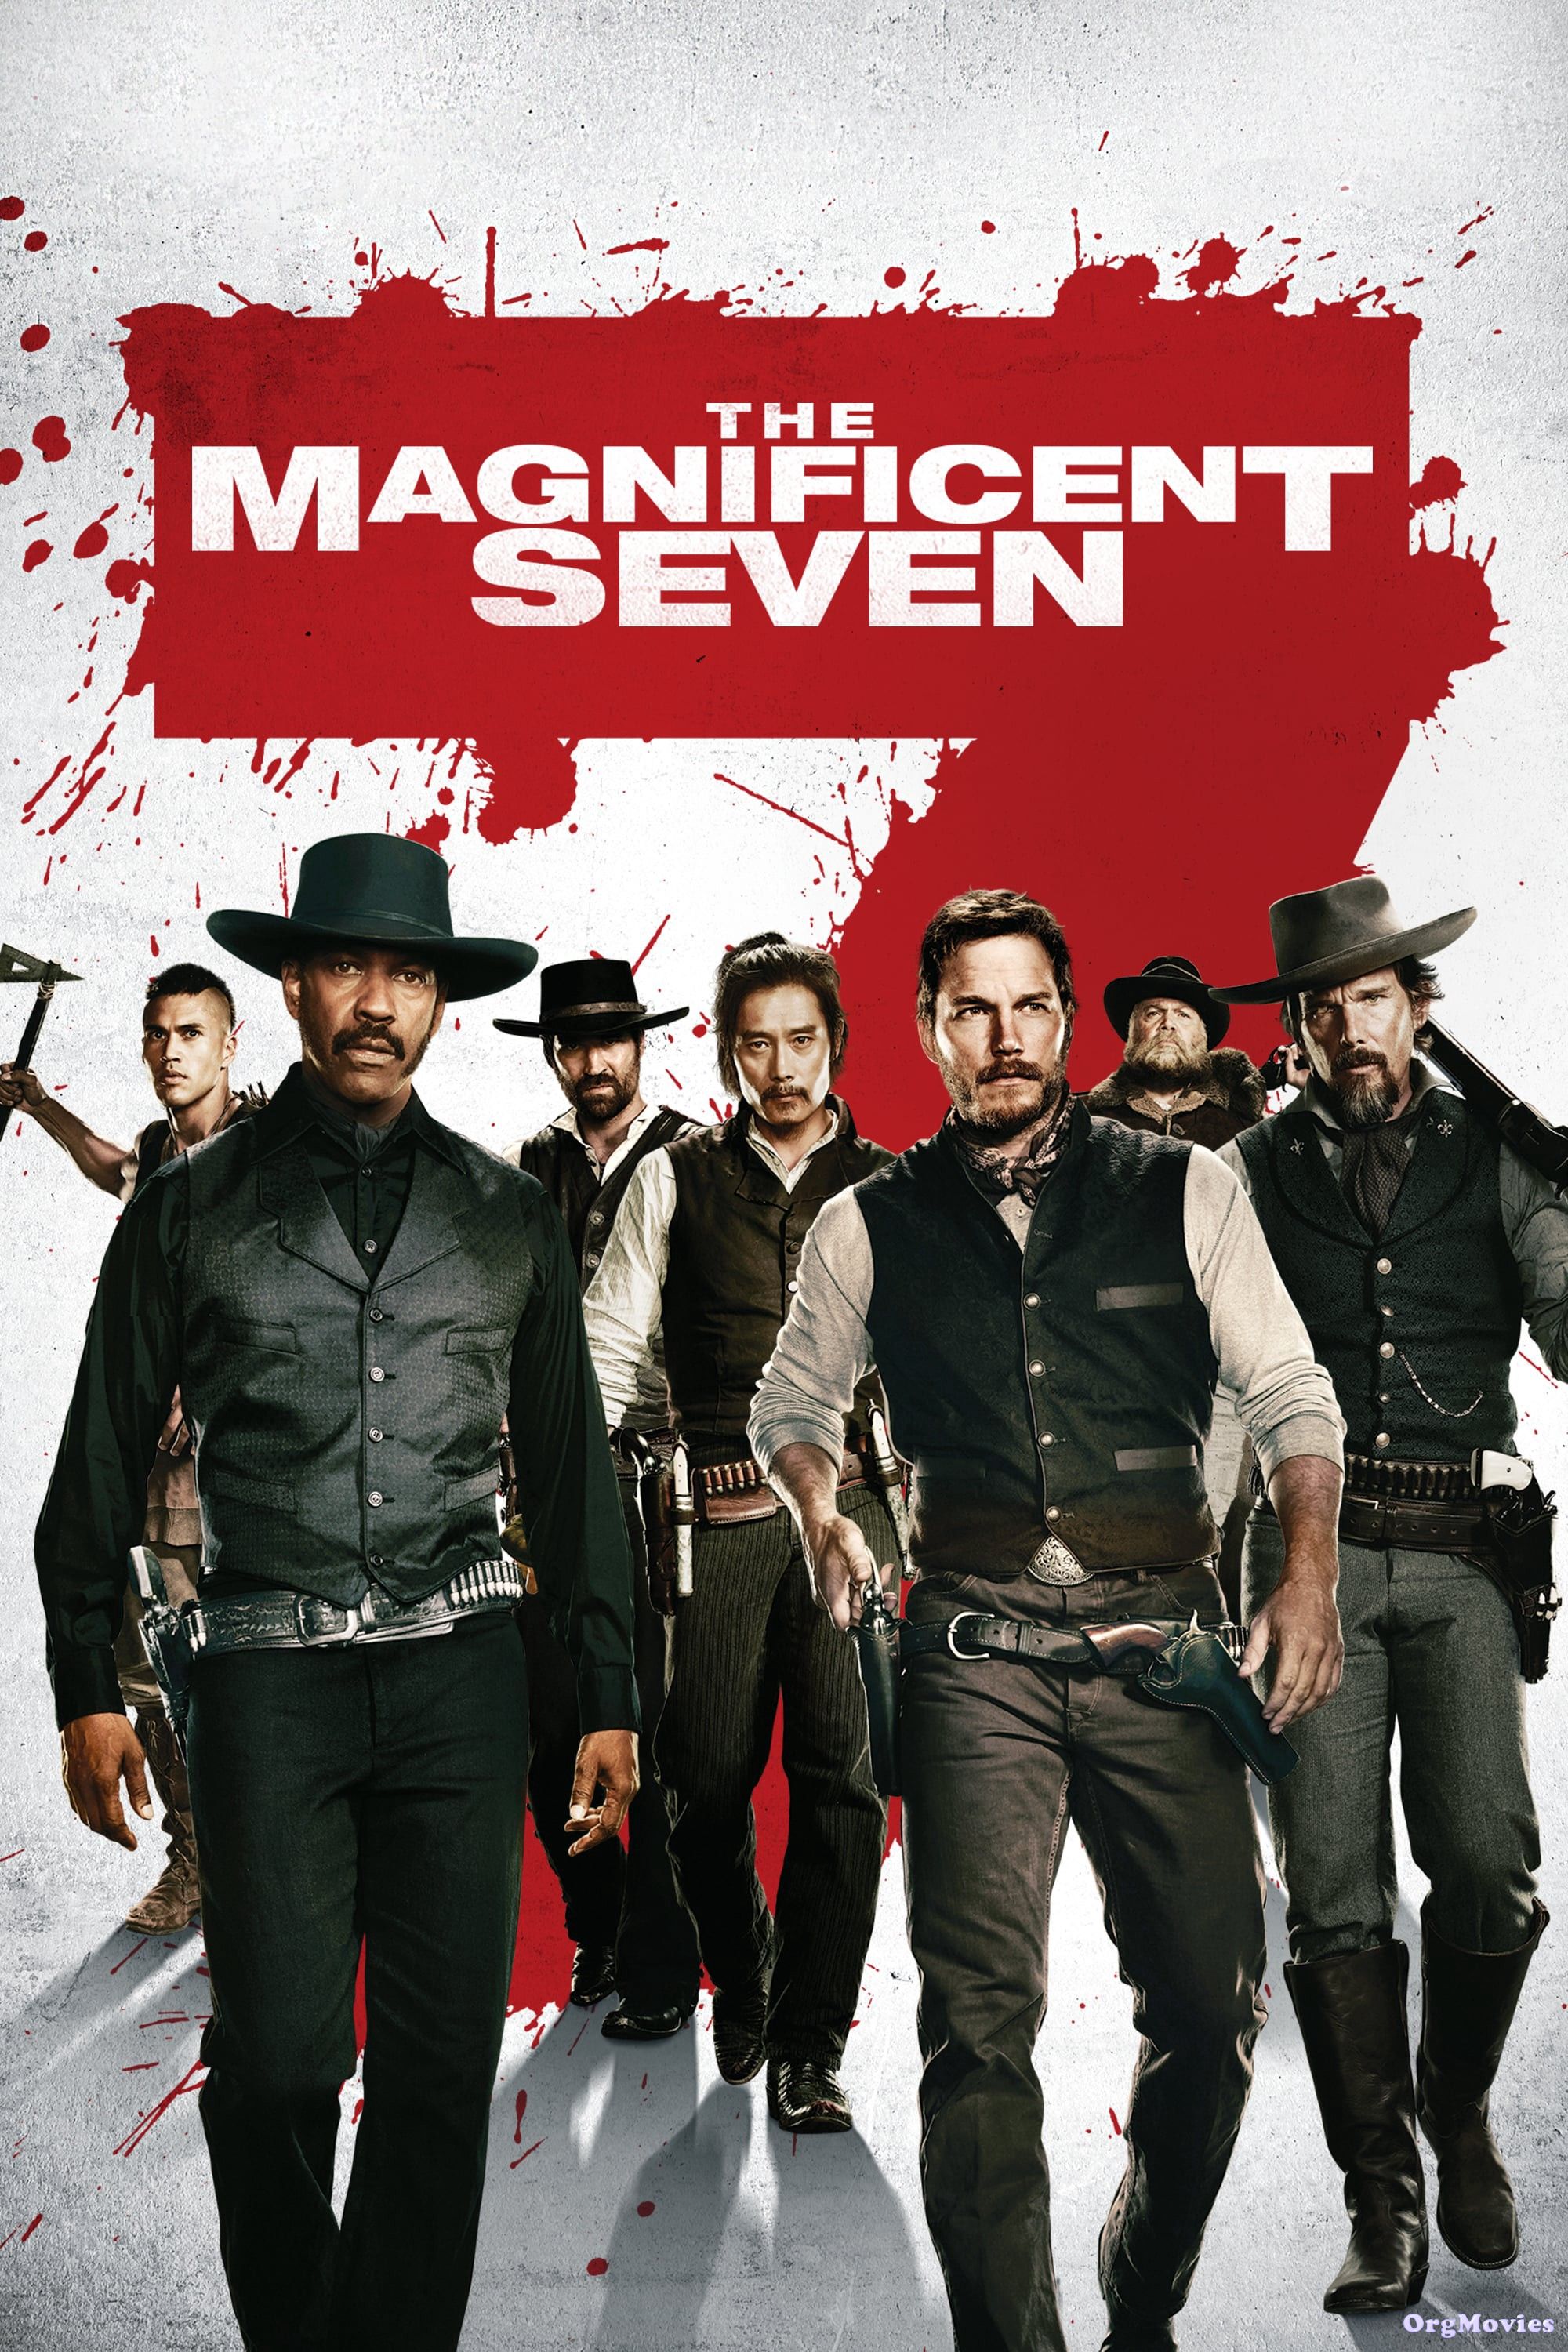 The Magnificent Seven 2016 Hindi Dubbed Full Movie download full movie